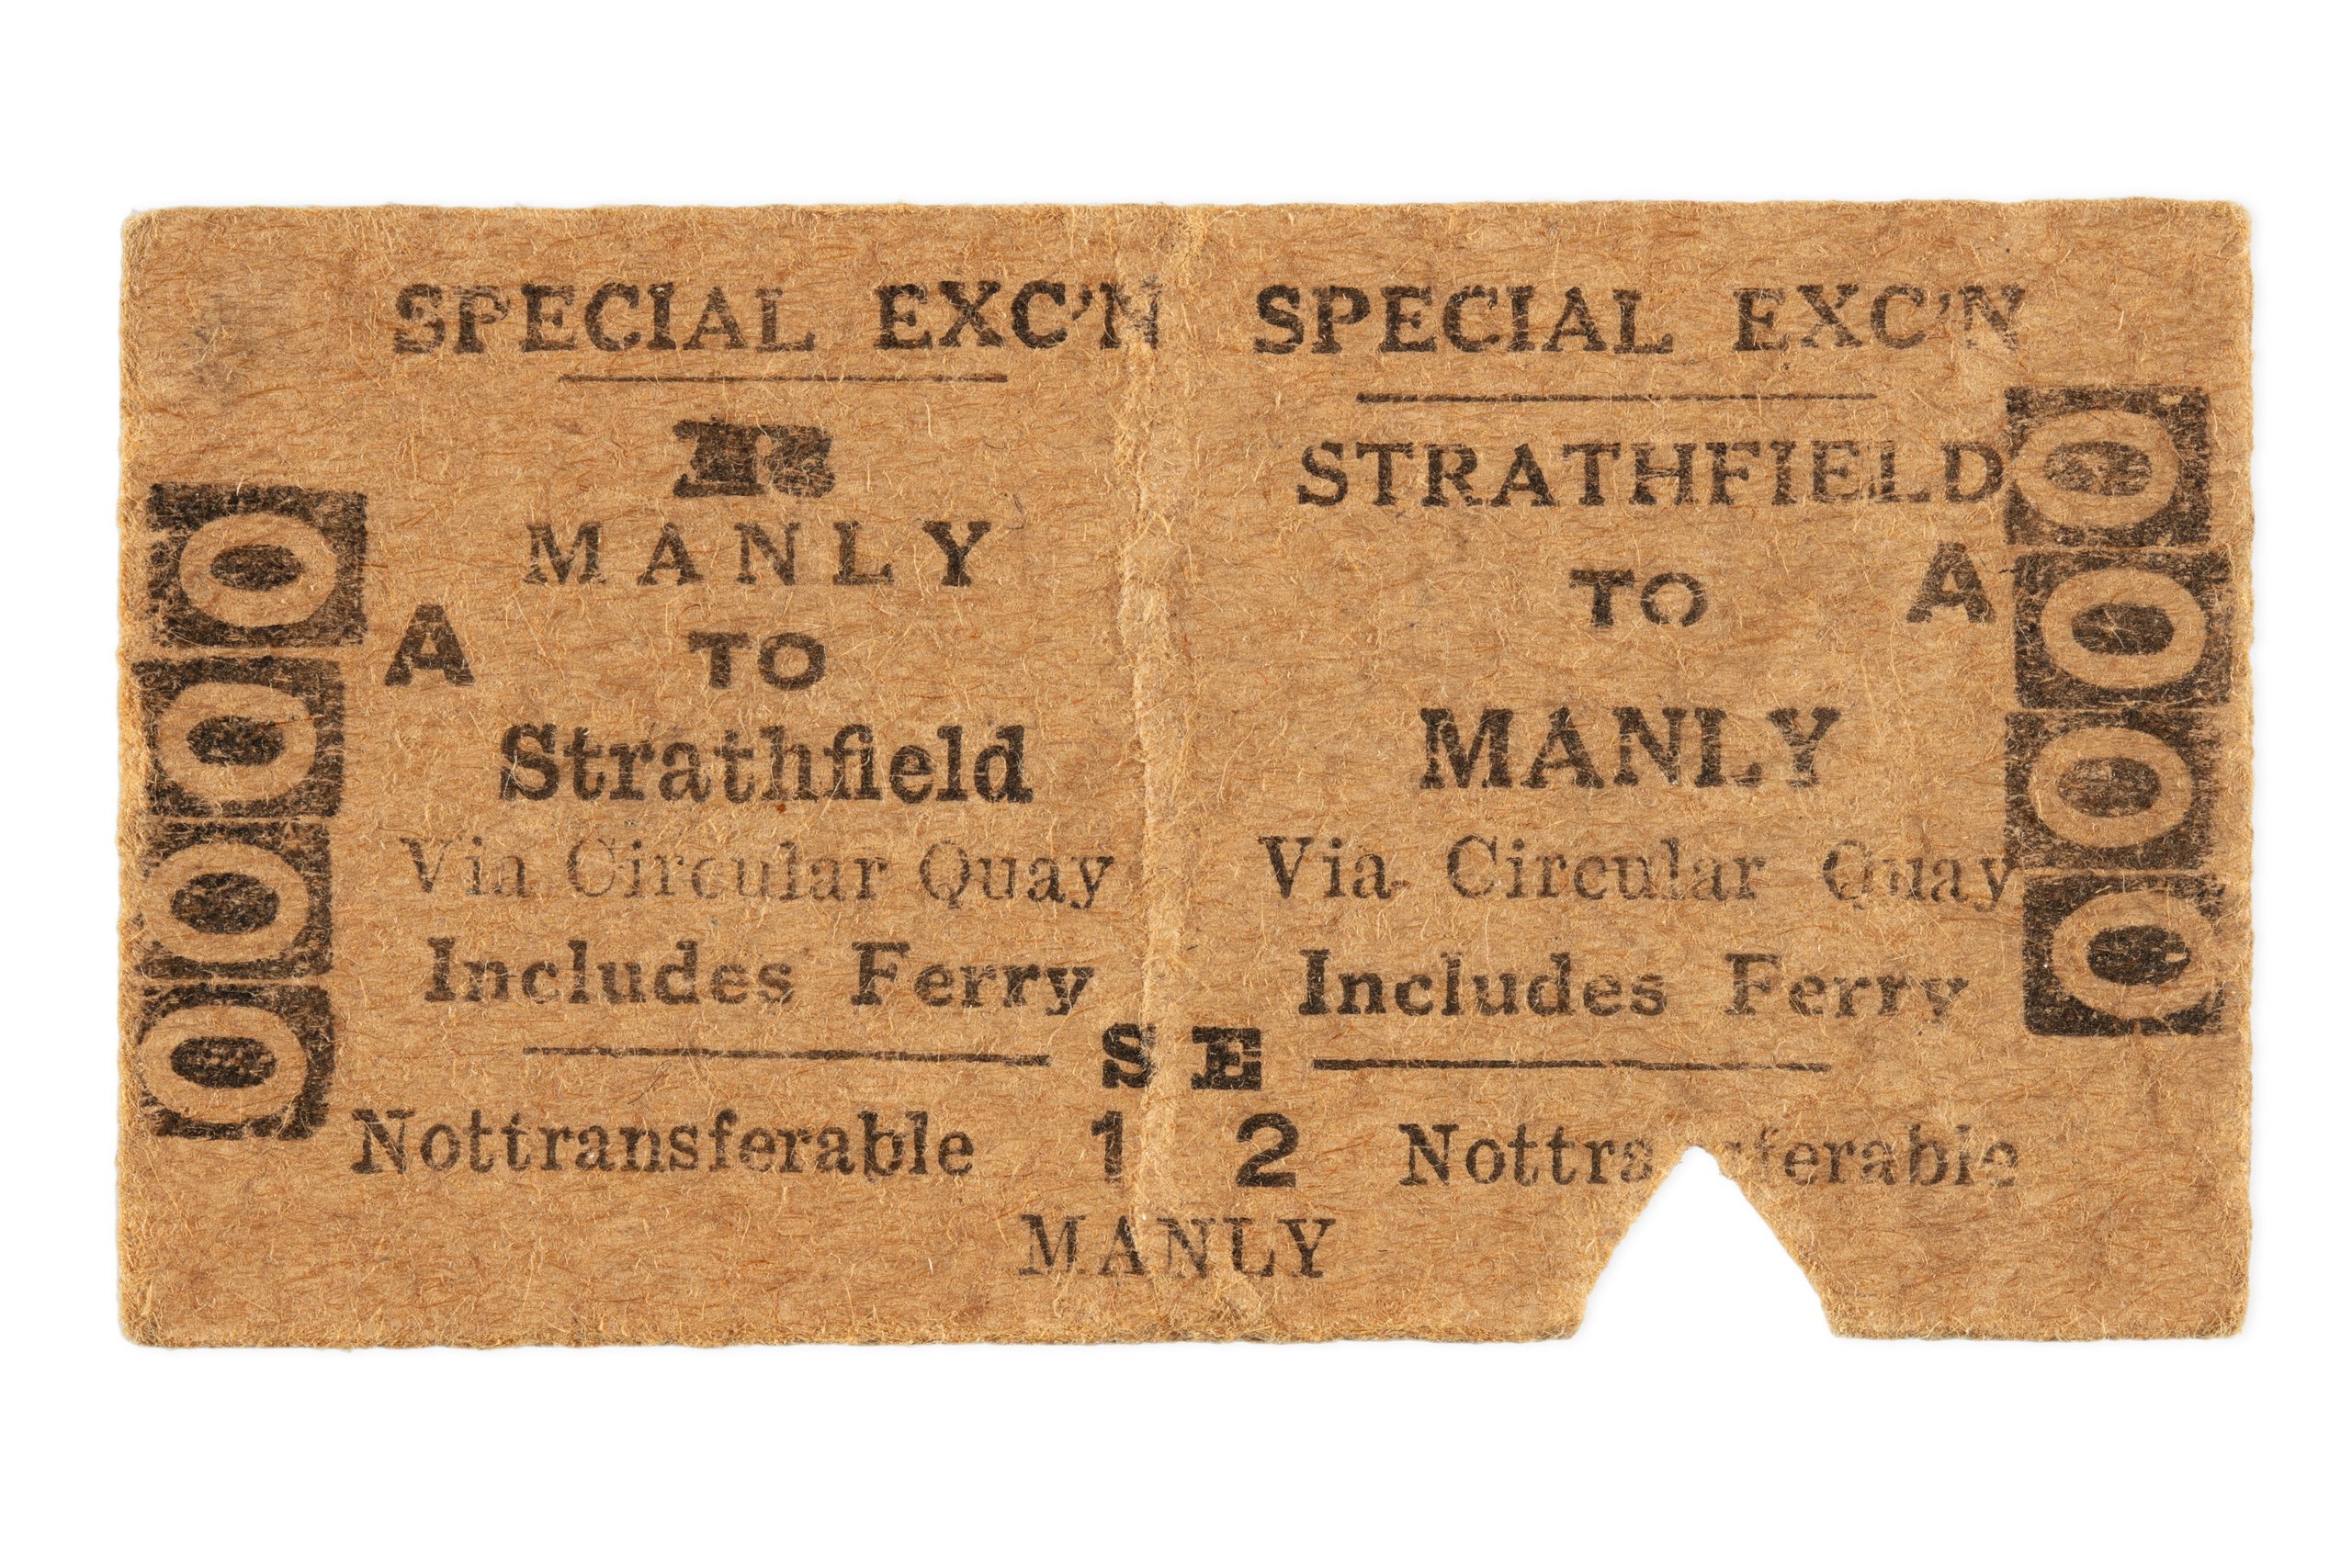 Train and Ferry ticket from the first day of operation of Circular Quay railway station